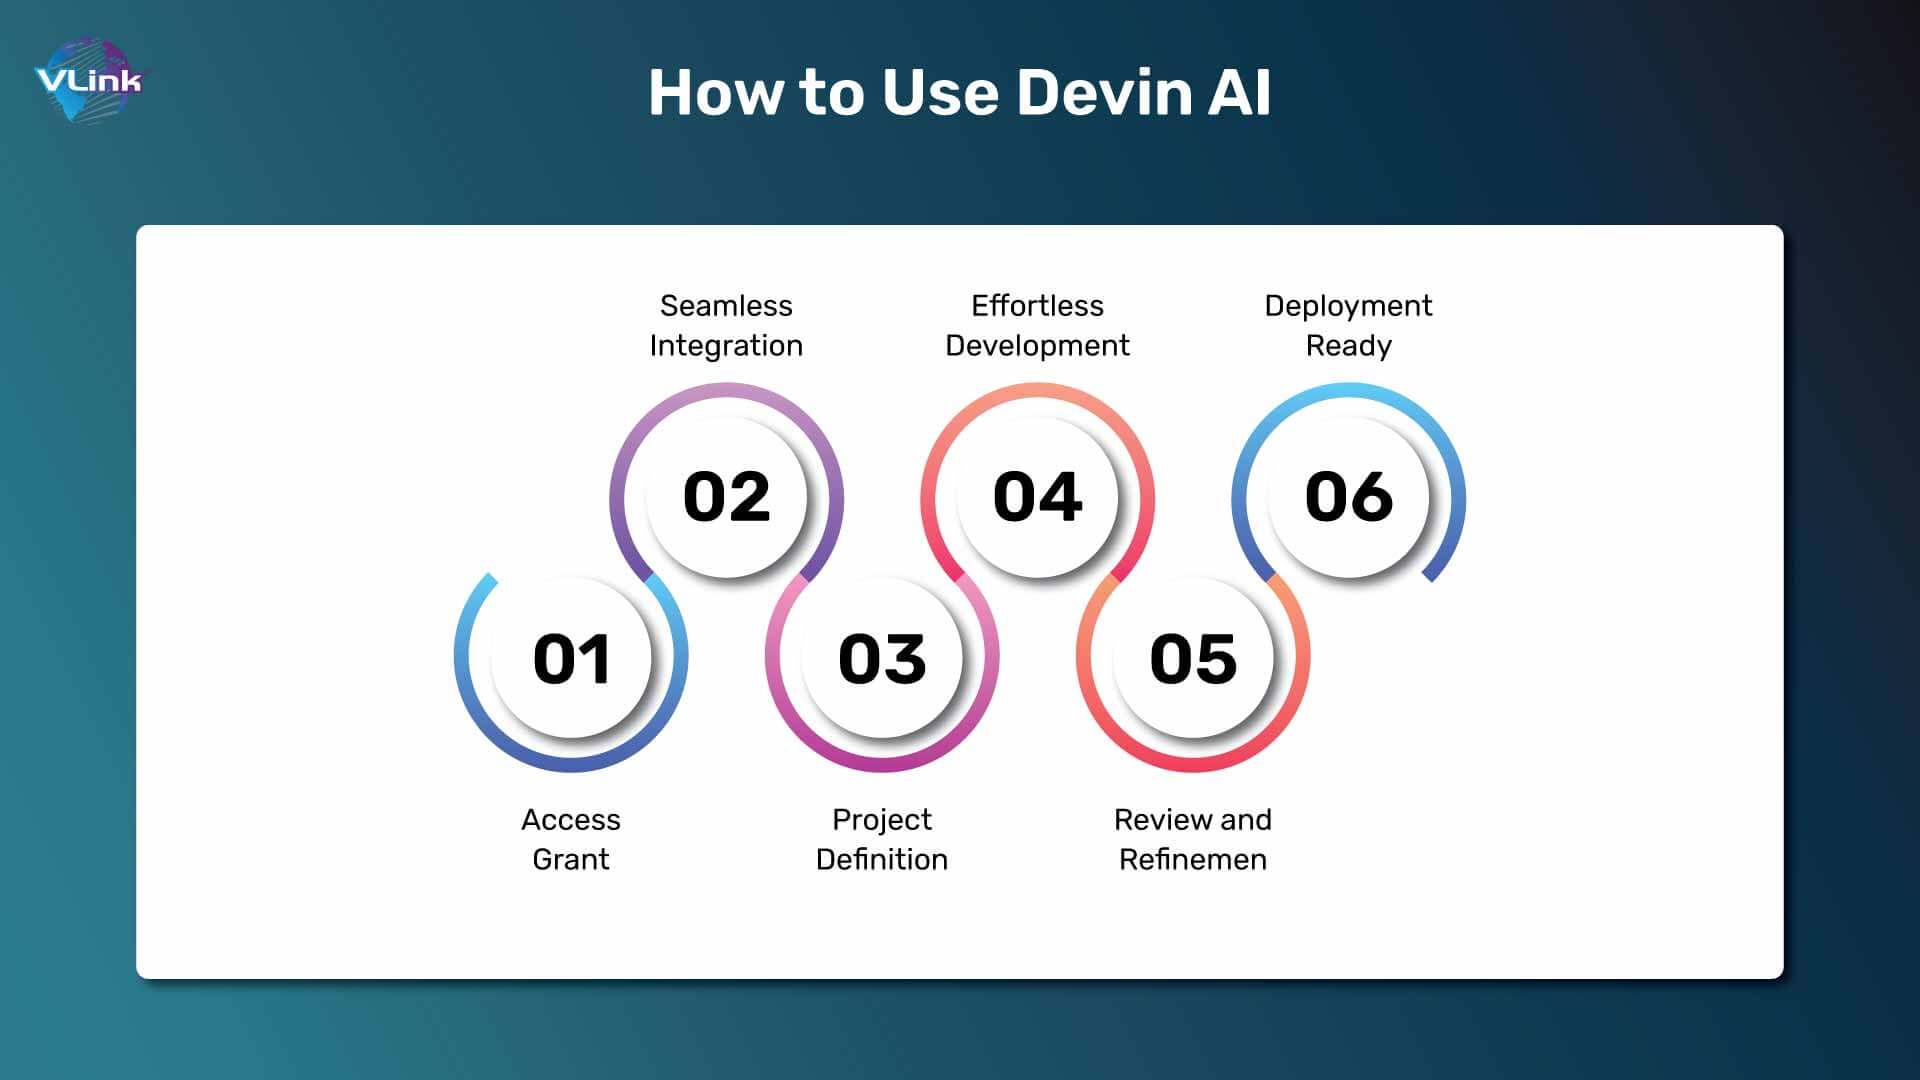 How to Use Devin AI